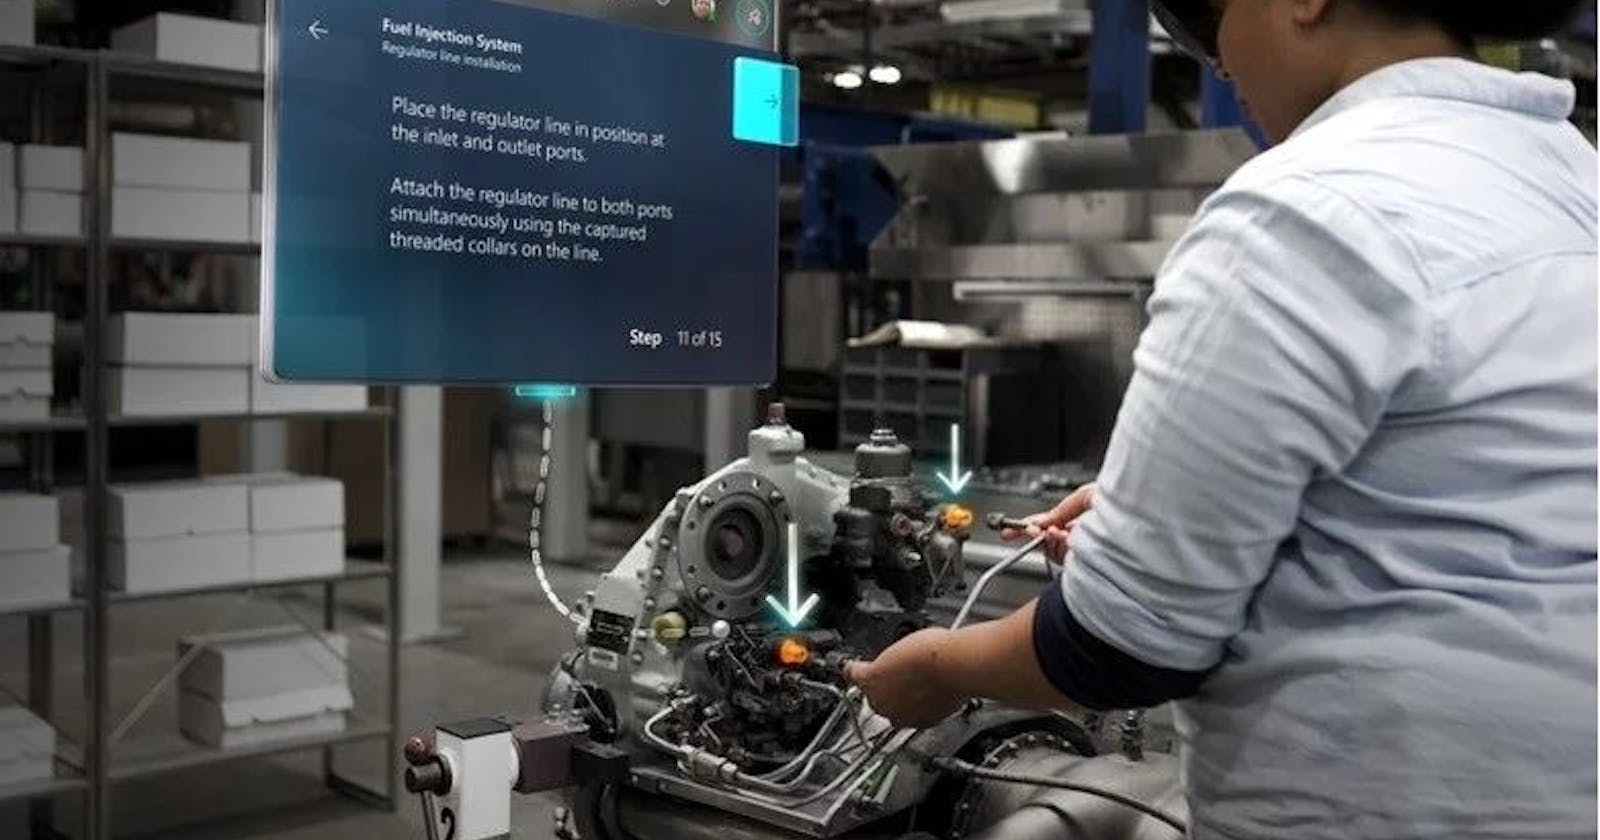 Improve worker productivity using Dynamics 365 Guides and HoloLens 2